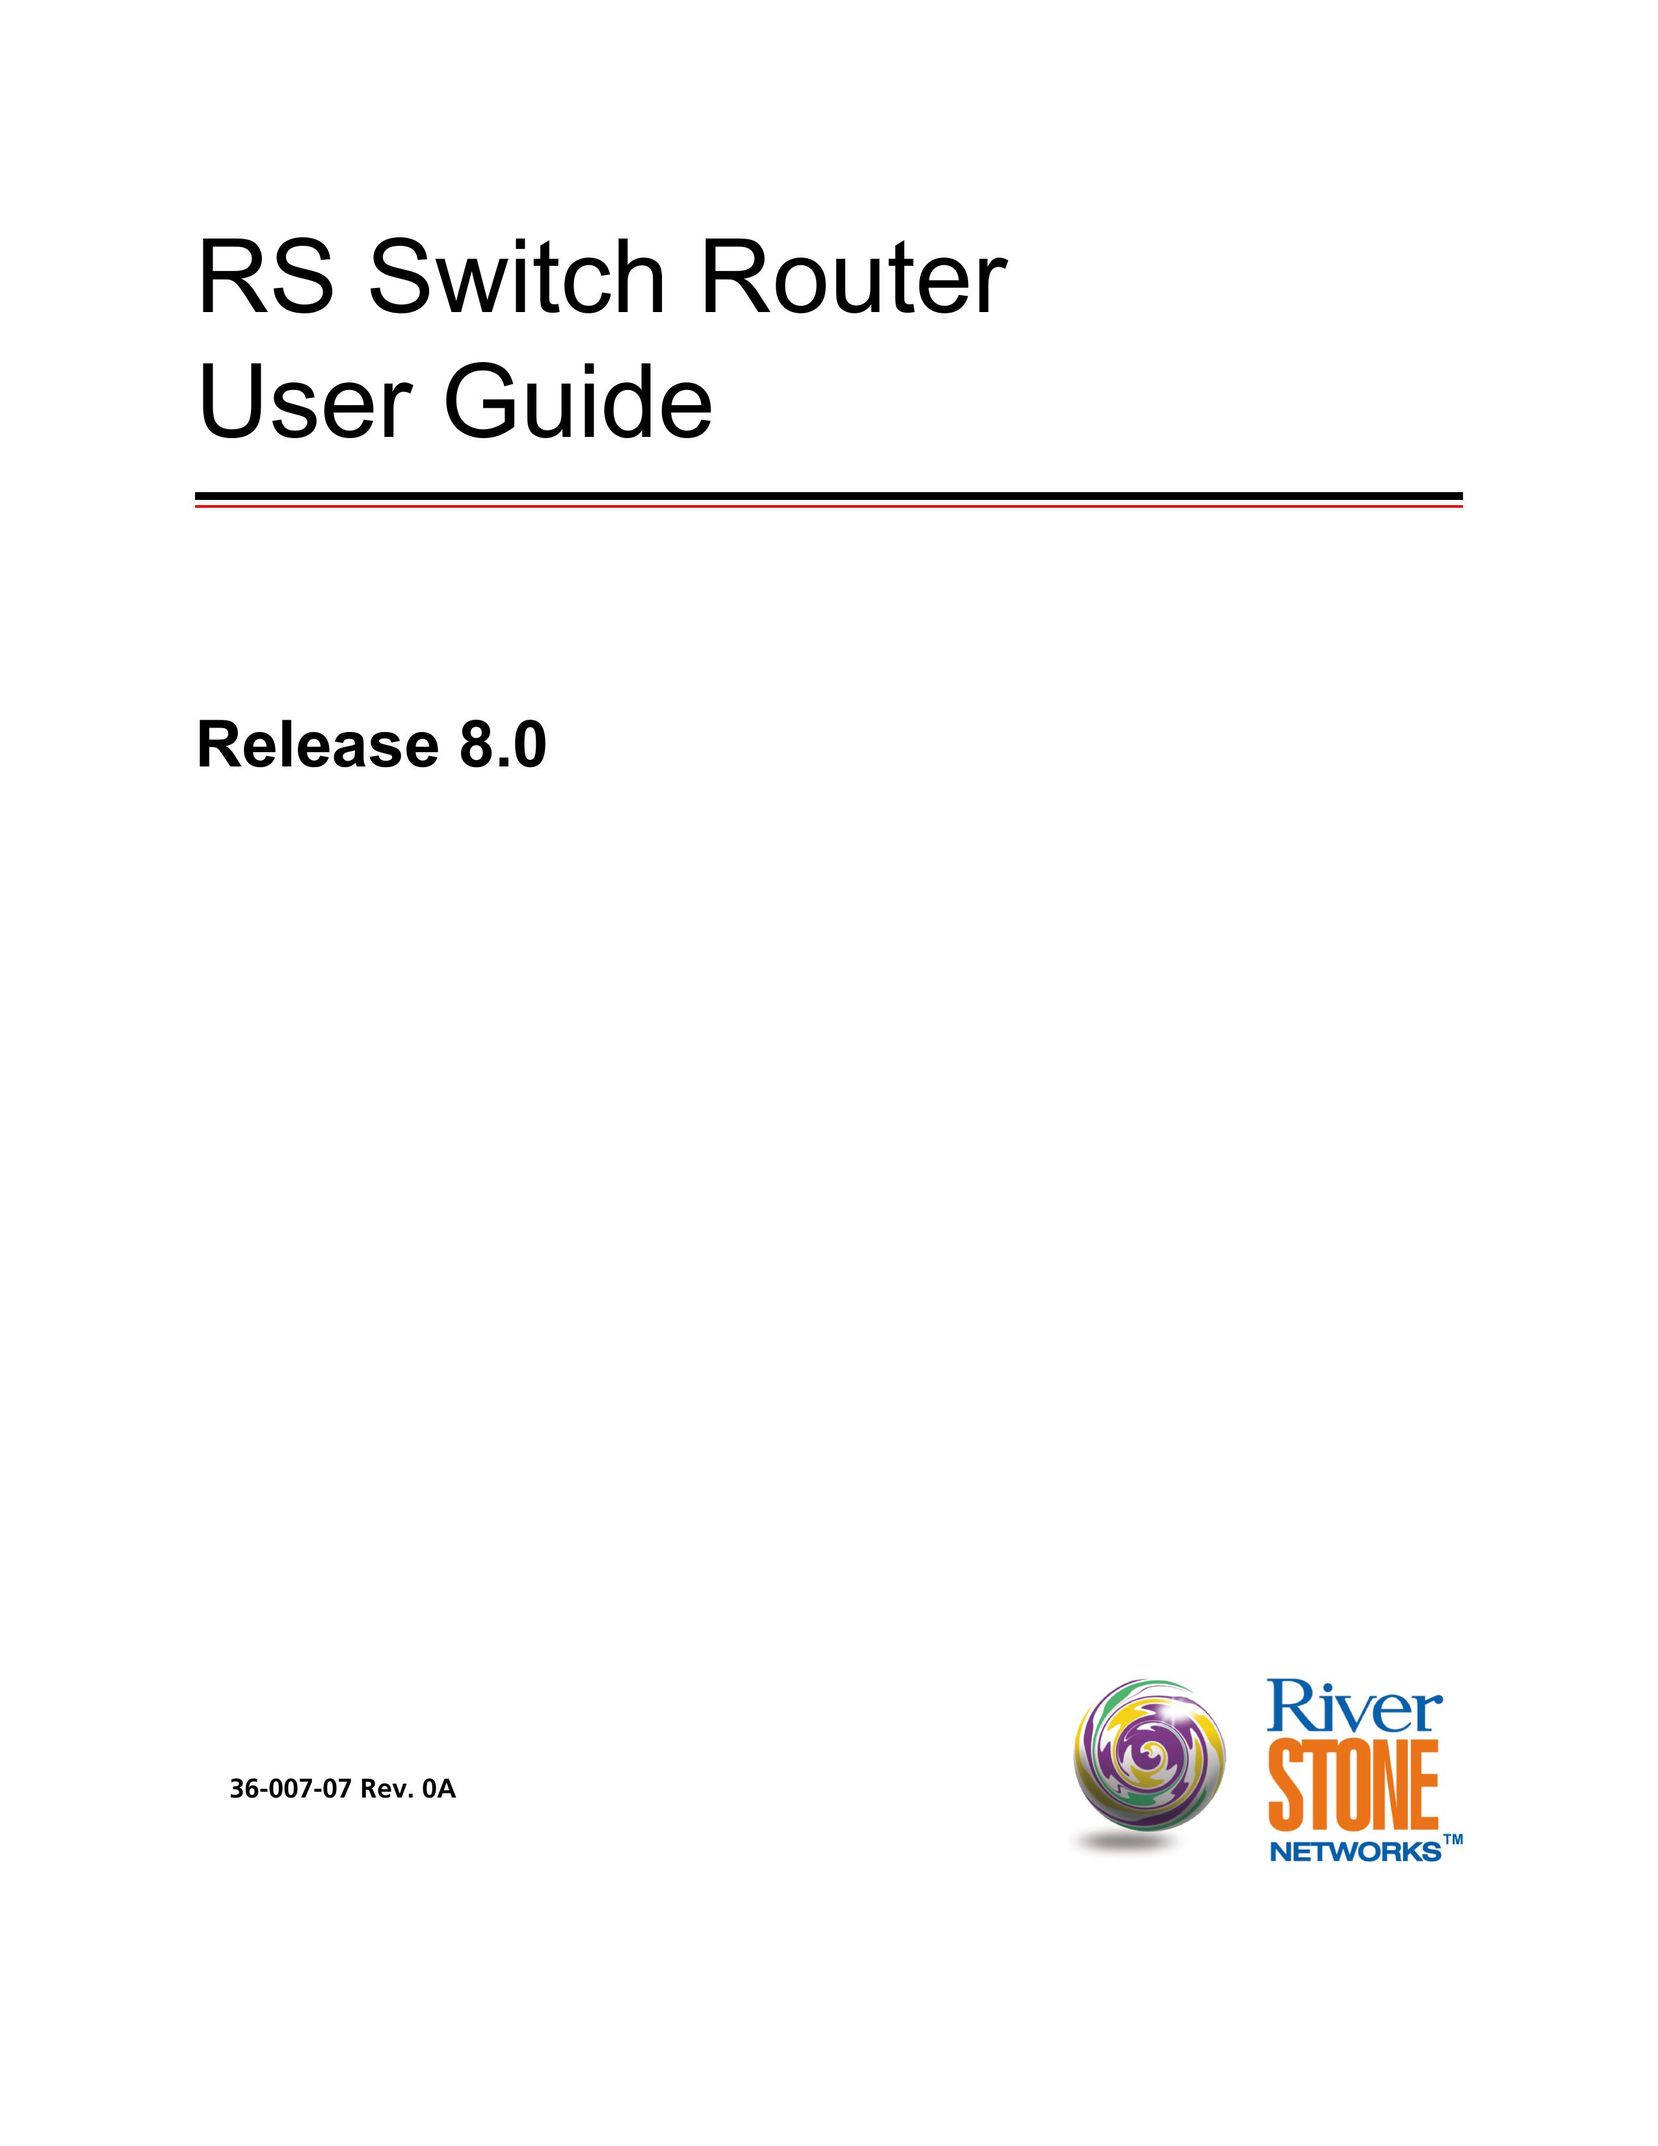 Riverstone Networks WICT1-12 Network Router User Manual